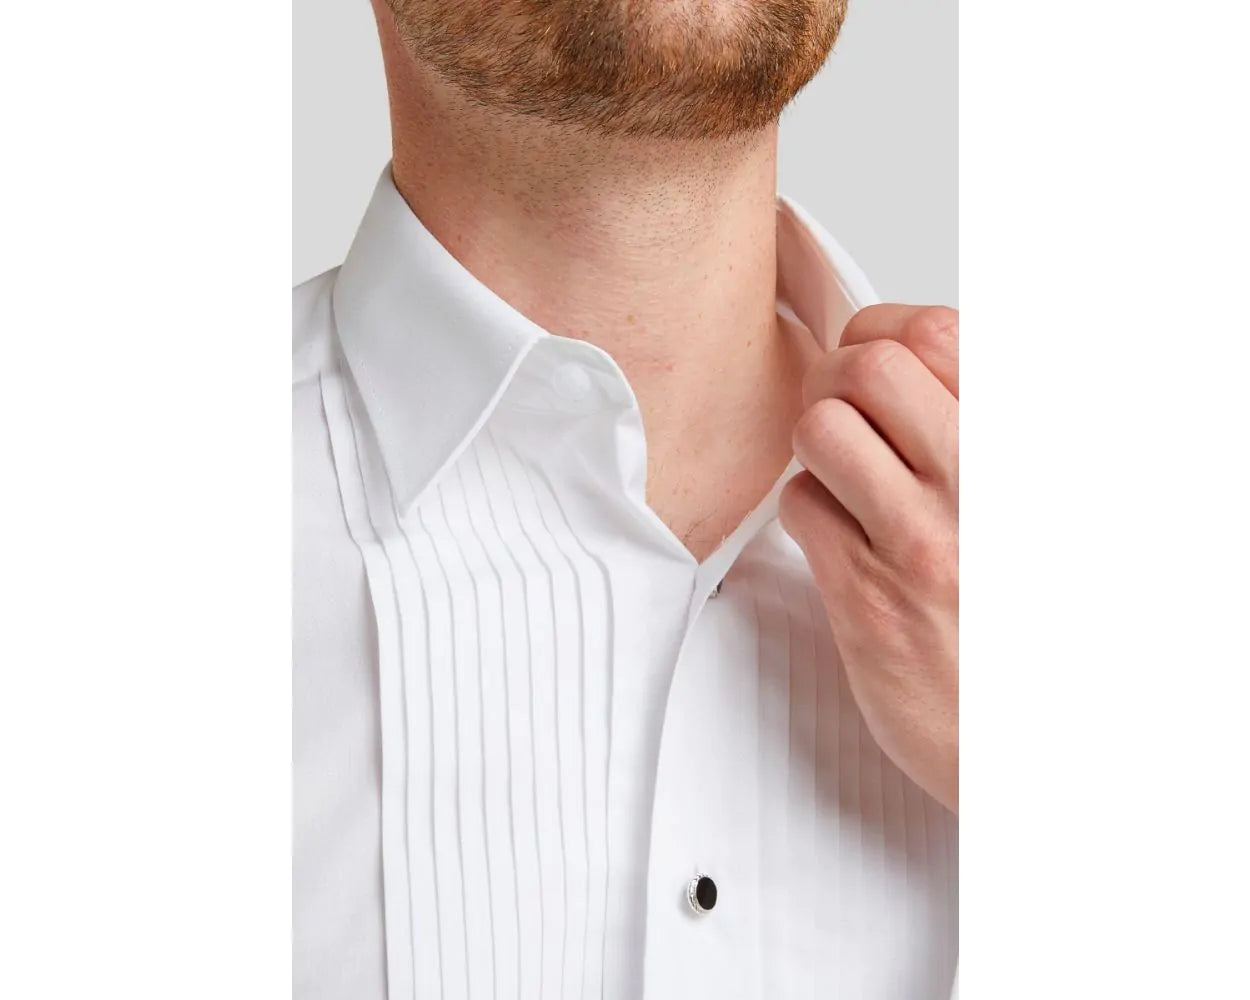 DOUBLE TWO Pleated Stitch Front Dress Shirt -  Double Cuff Regular Collar – White